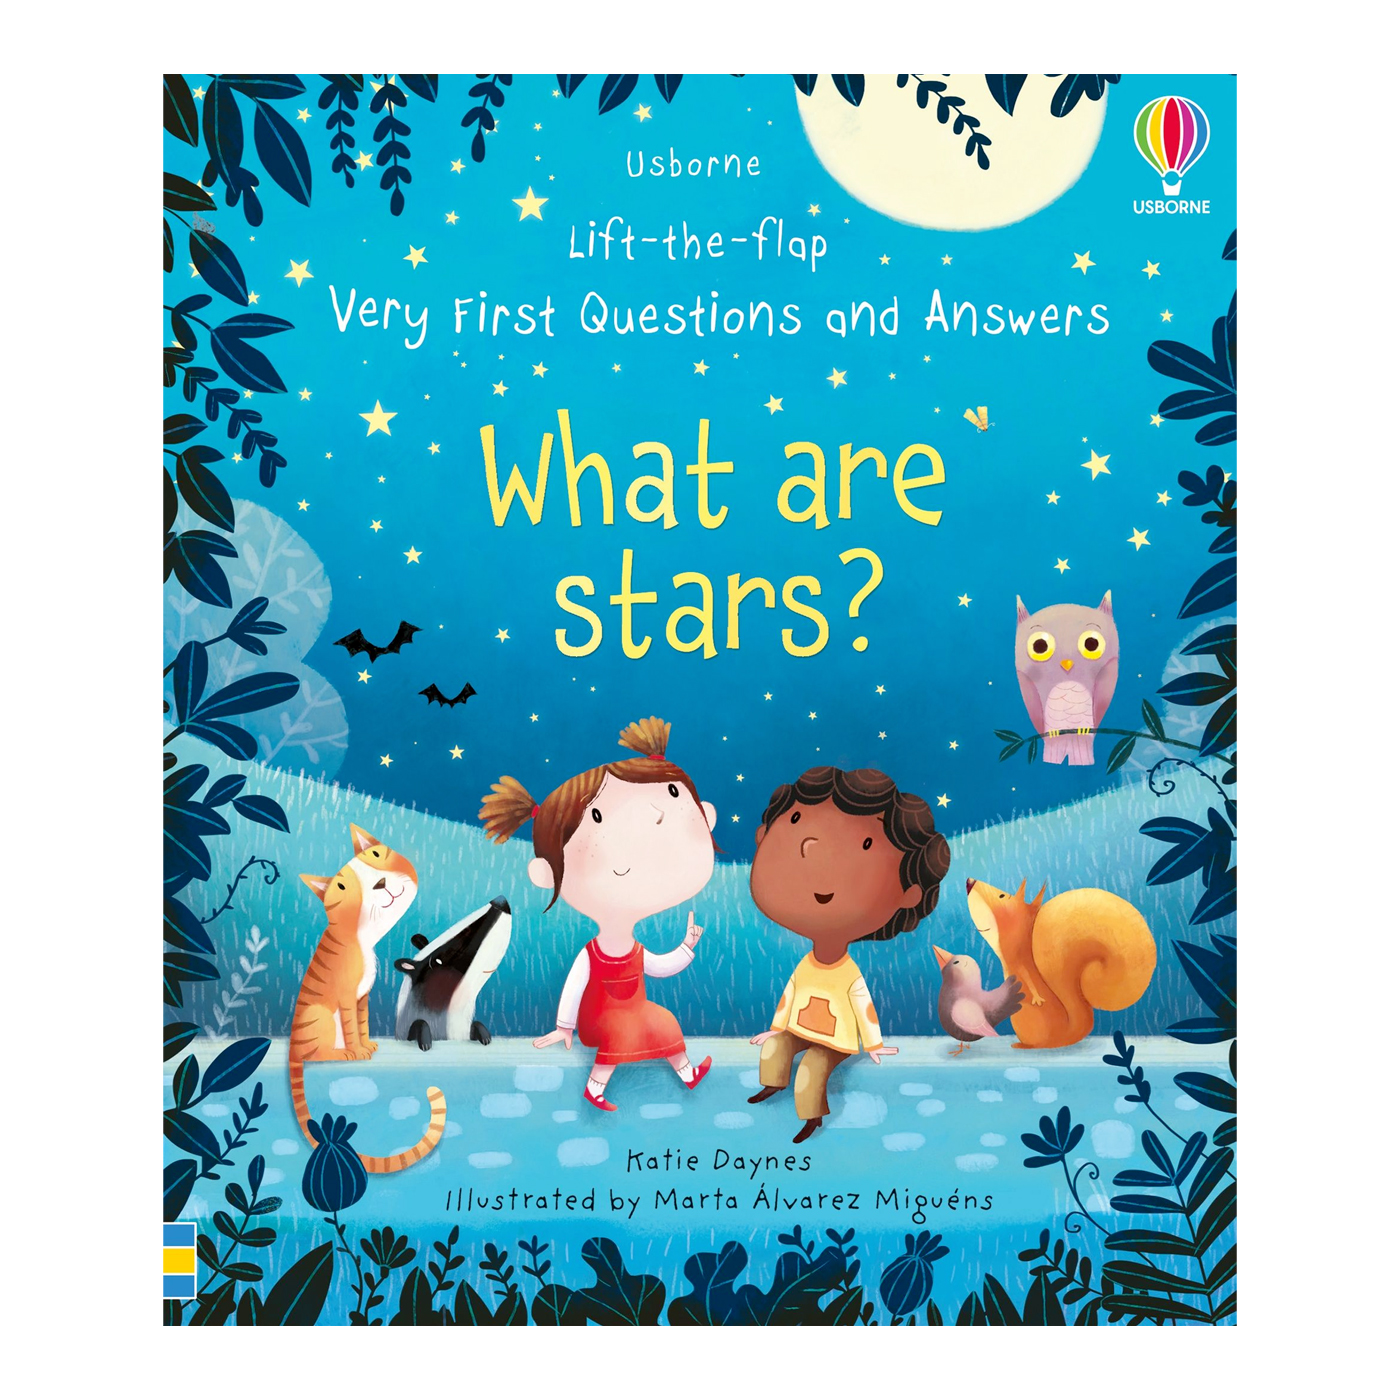  Very First Questions and Answers What are stars?